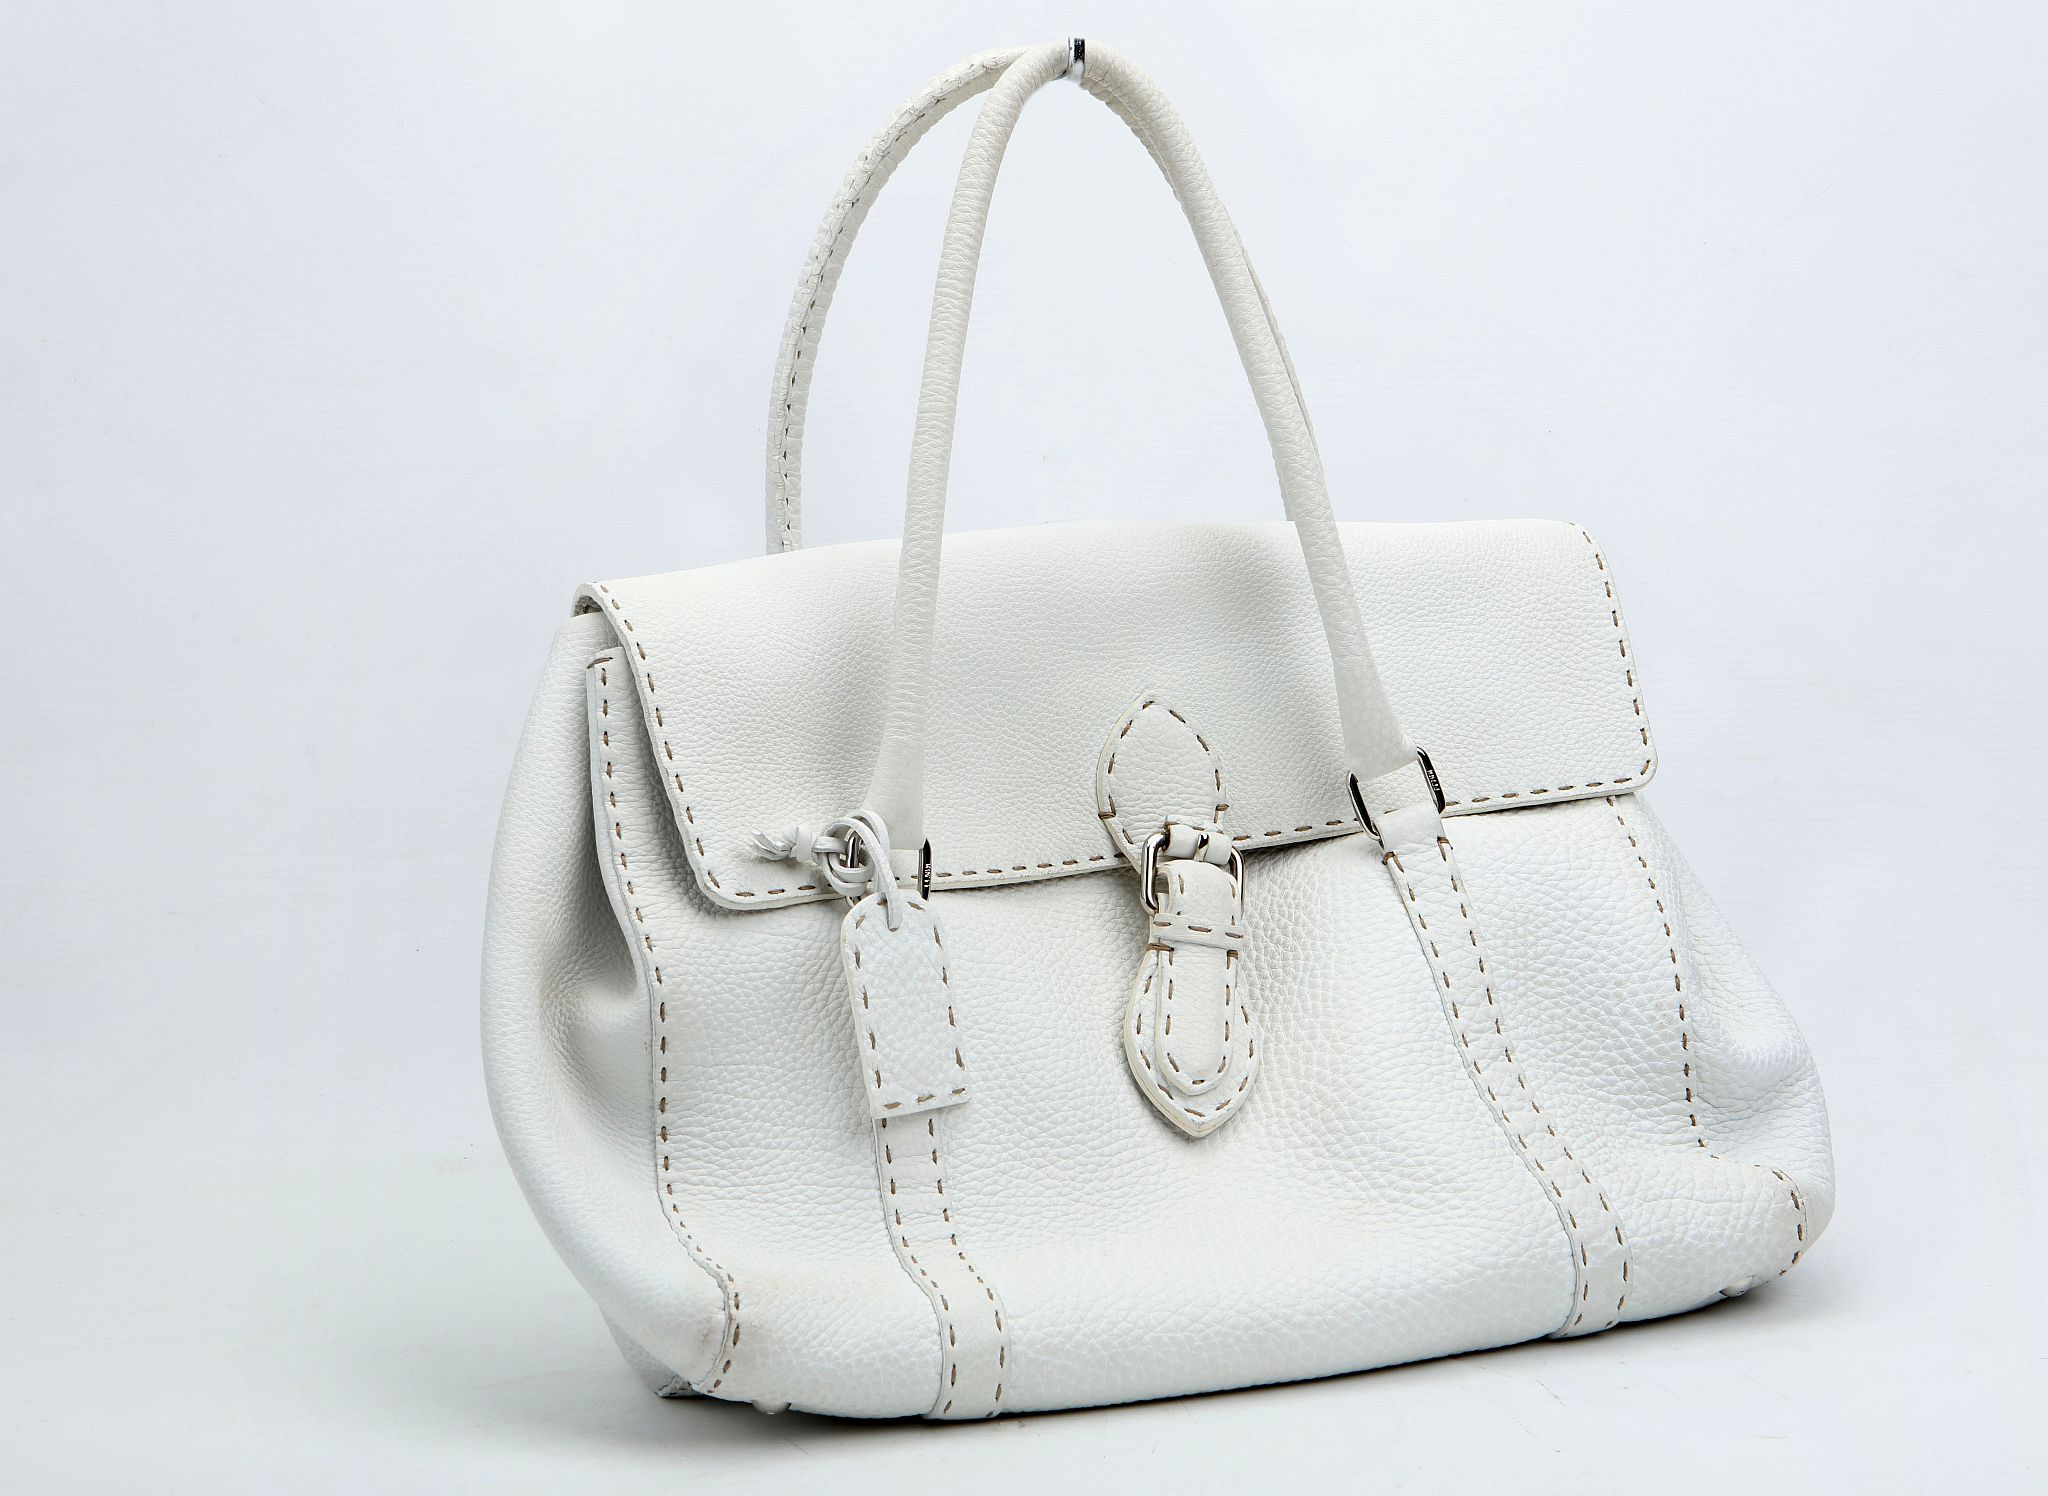 FENDI SELLERIA SHOULDER BAG, white stitched leather with silver tone hardware, 35cm wide, 30cm high,